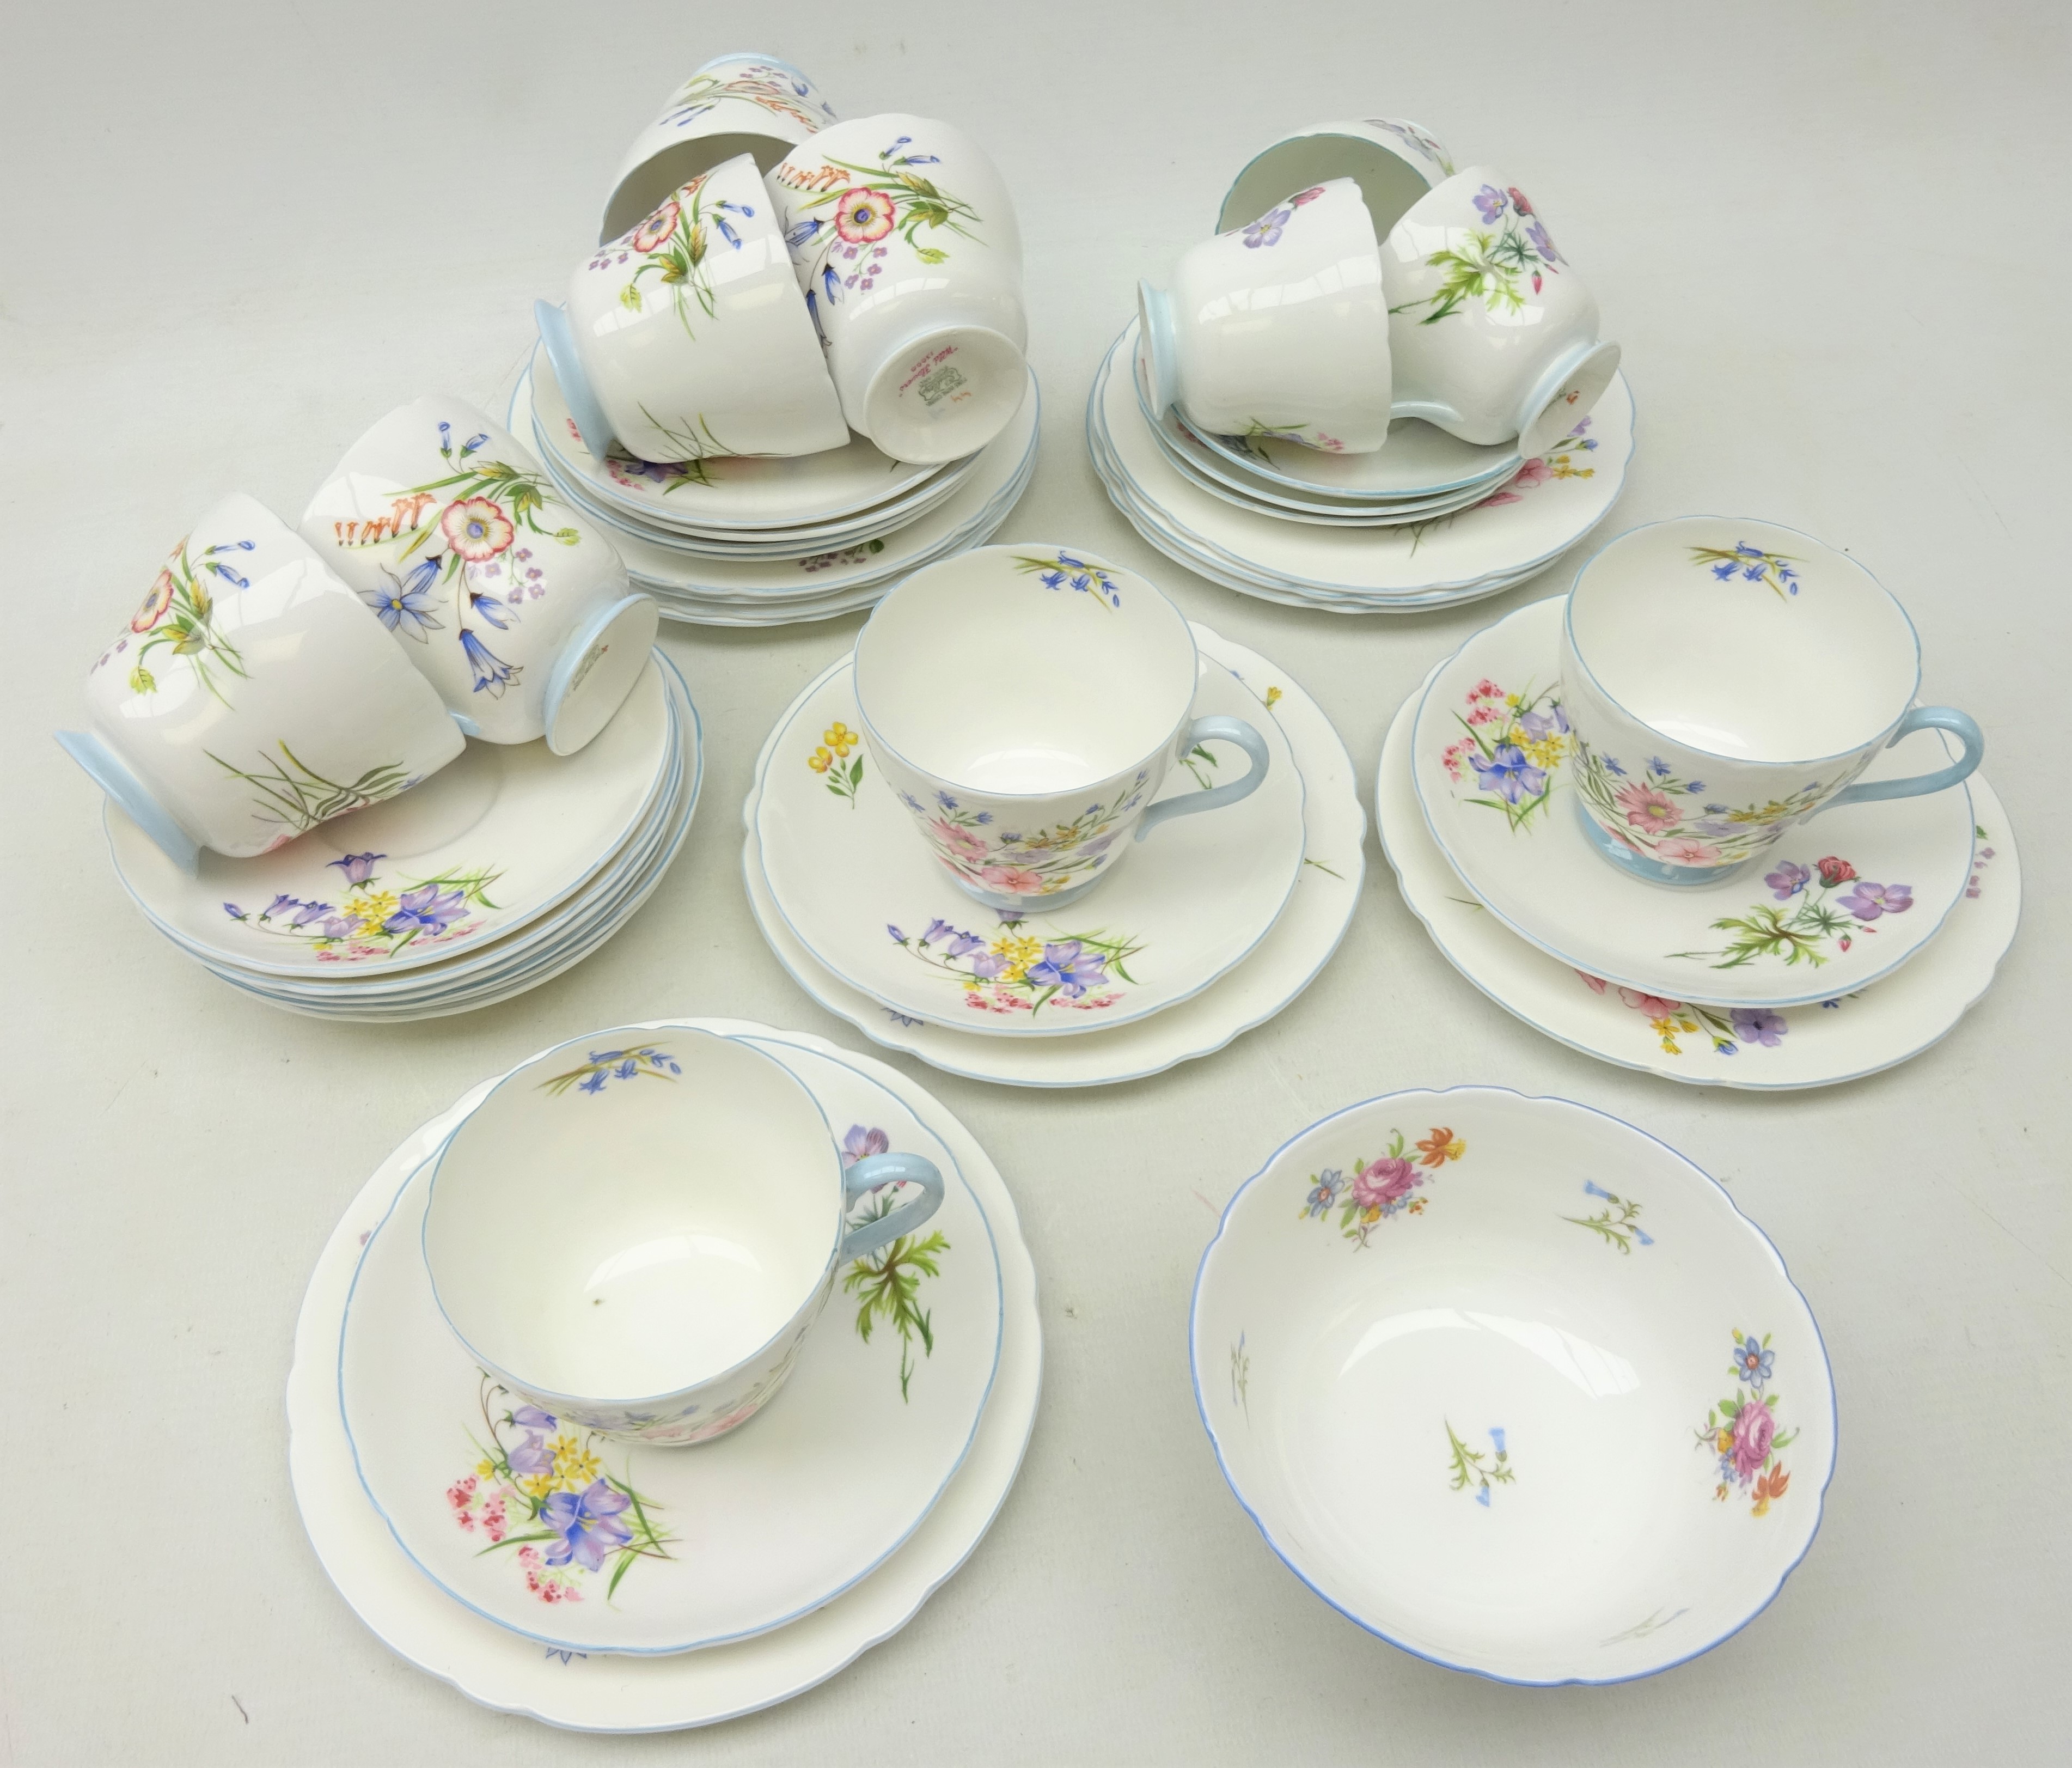 Eight Shelley 'Wild Flowers' pattern trios, three coffee cups and saucers, sugar bowl etc, No.